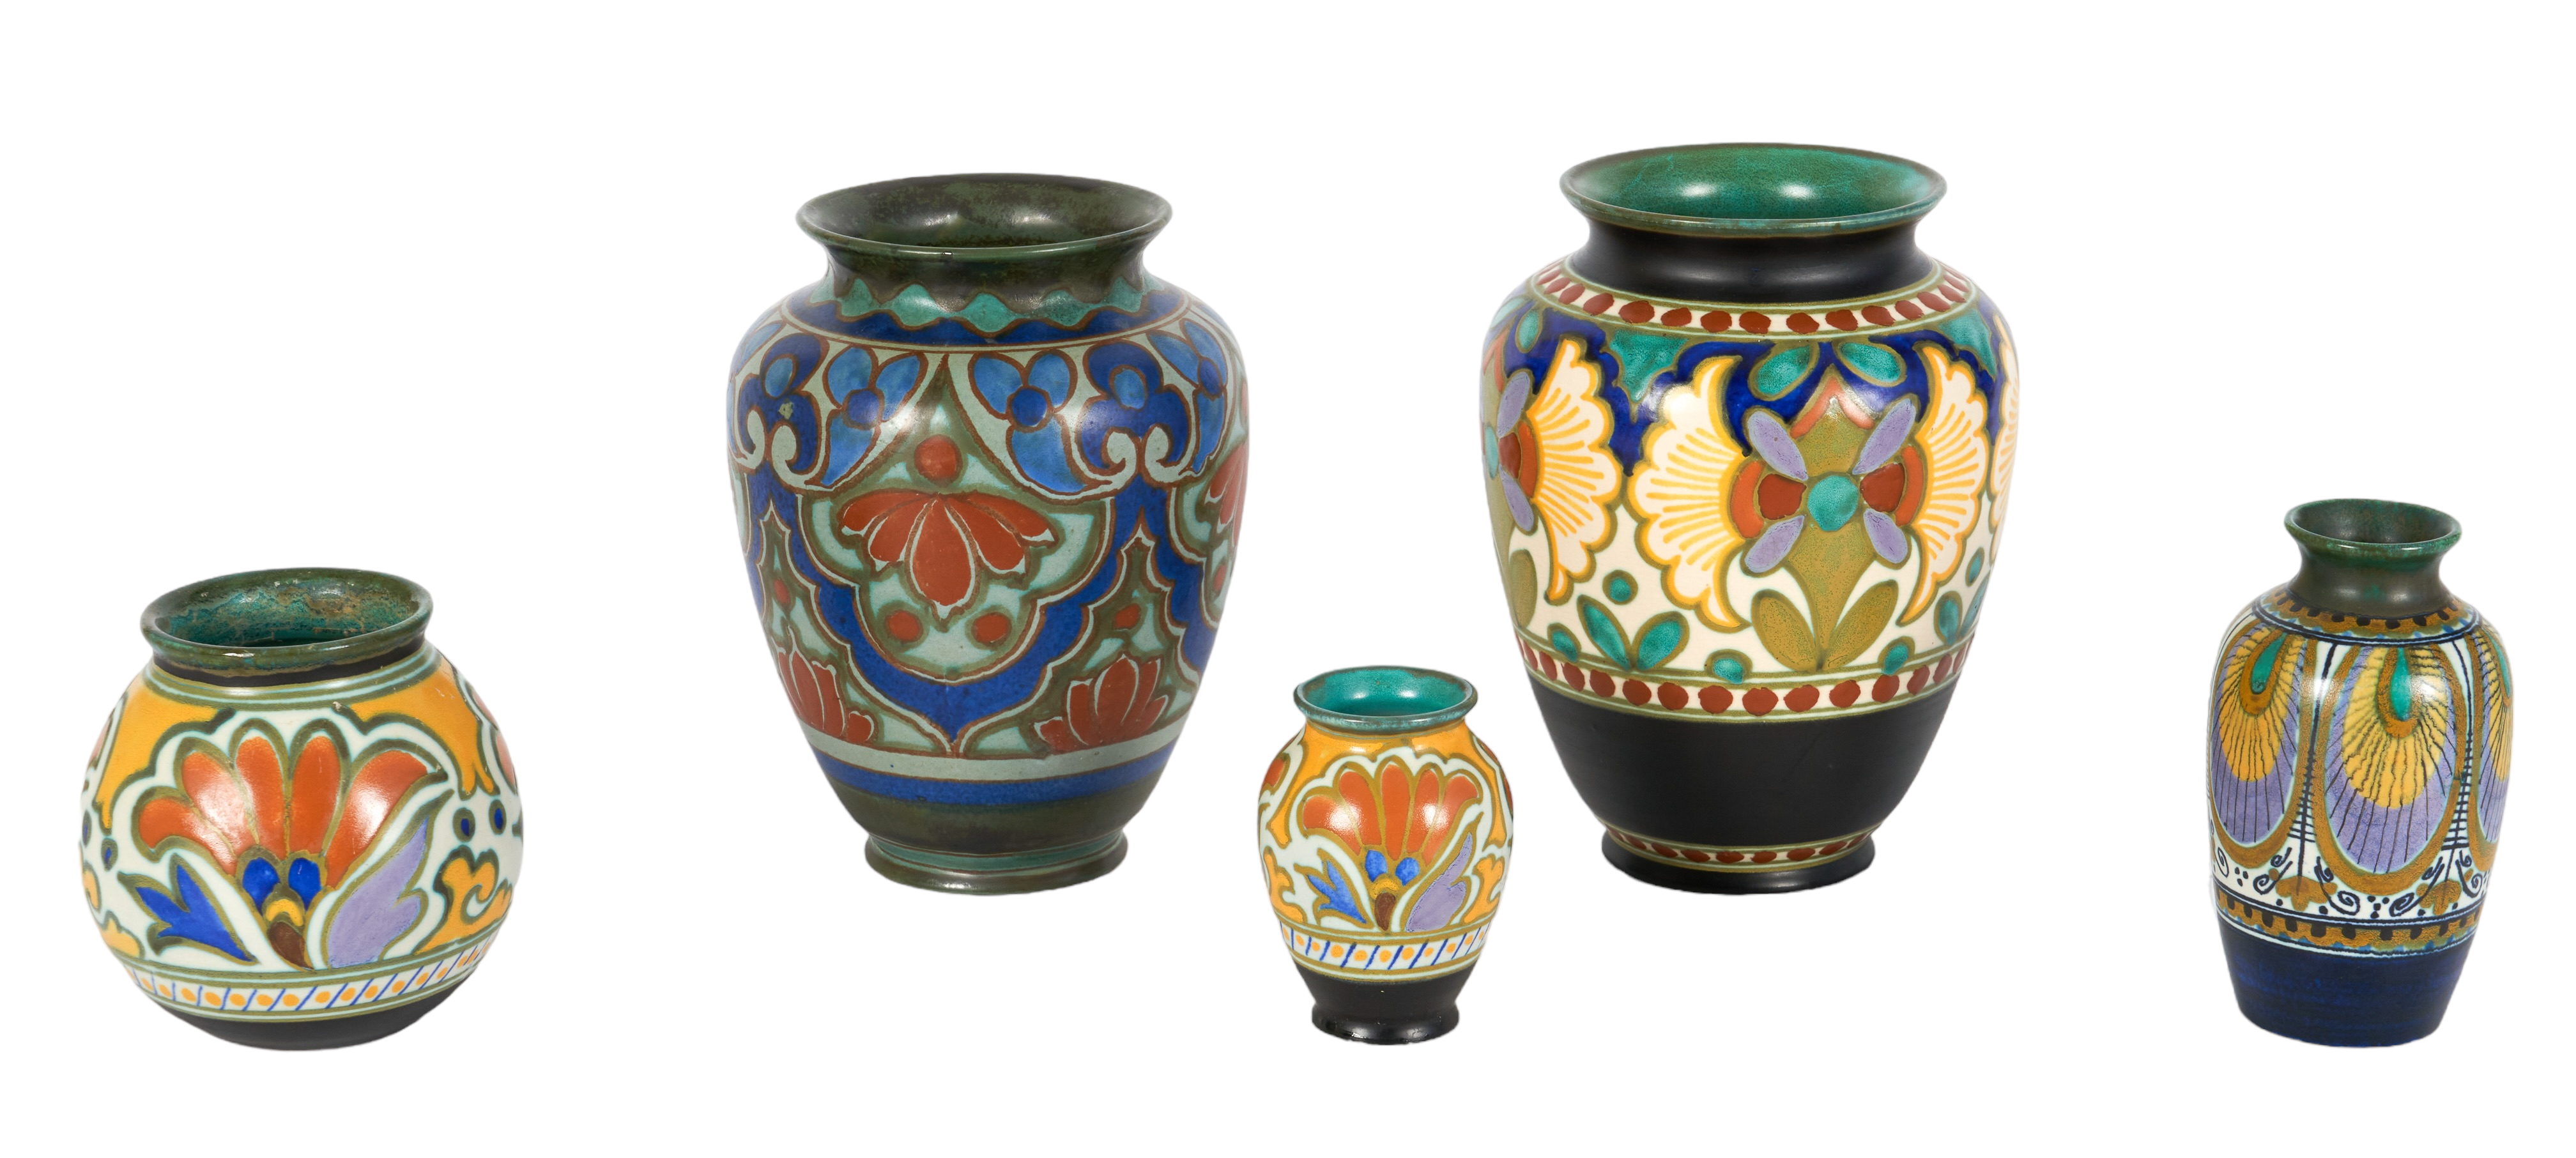  5 Gouda pottery vases to include 2e23d1